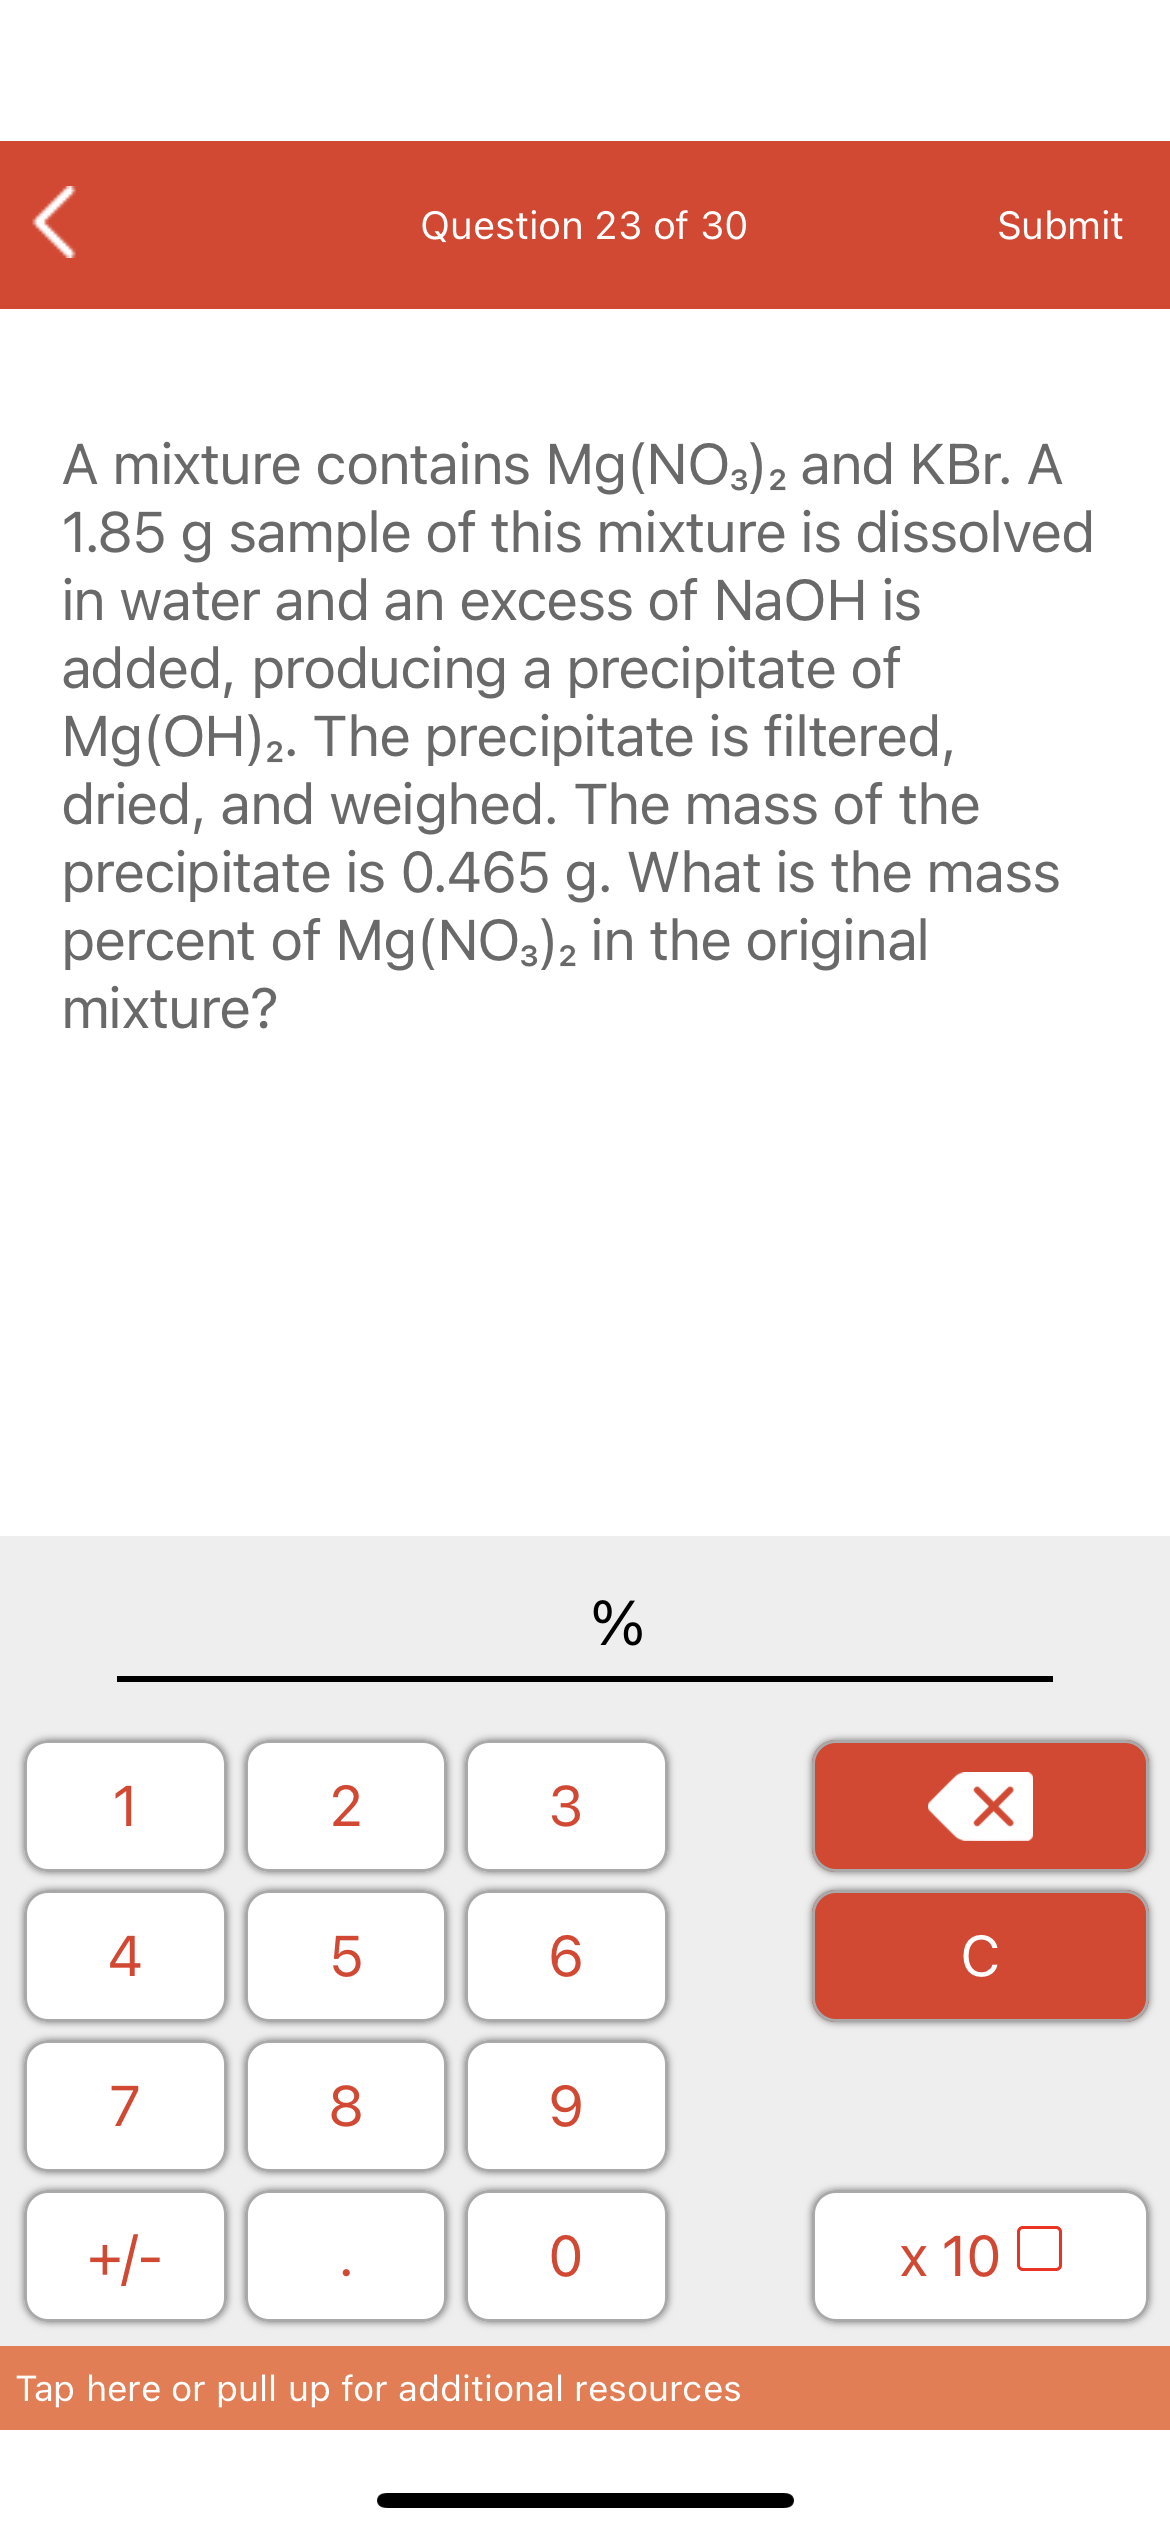 Question 23 of 30
Submit
A mixture contains Mg(NO3)2 and KBr. A
1.85 g sample of this mixture is dissolved
in water and an excess of NaOH is
added, producing a precipitate of
Mg(OH)2. The precipitate is filtered,
dried, and weighed. The mass of the
precipitate is 0.465 g. What is the mass
percent of Mg(NO:)2 in the original
mixture?
%
1
4
6.
C
7
+/-
x 10 0
Tap here or pull up for additional resources
LO
00
